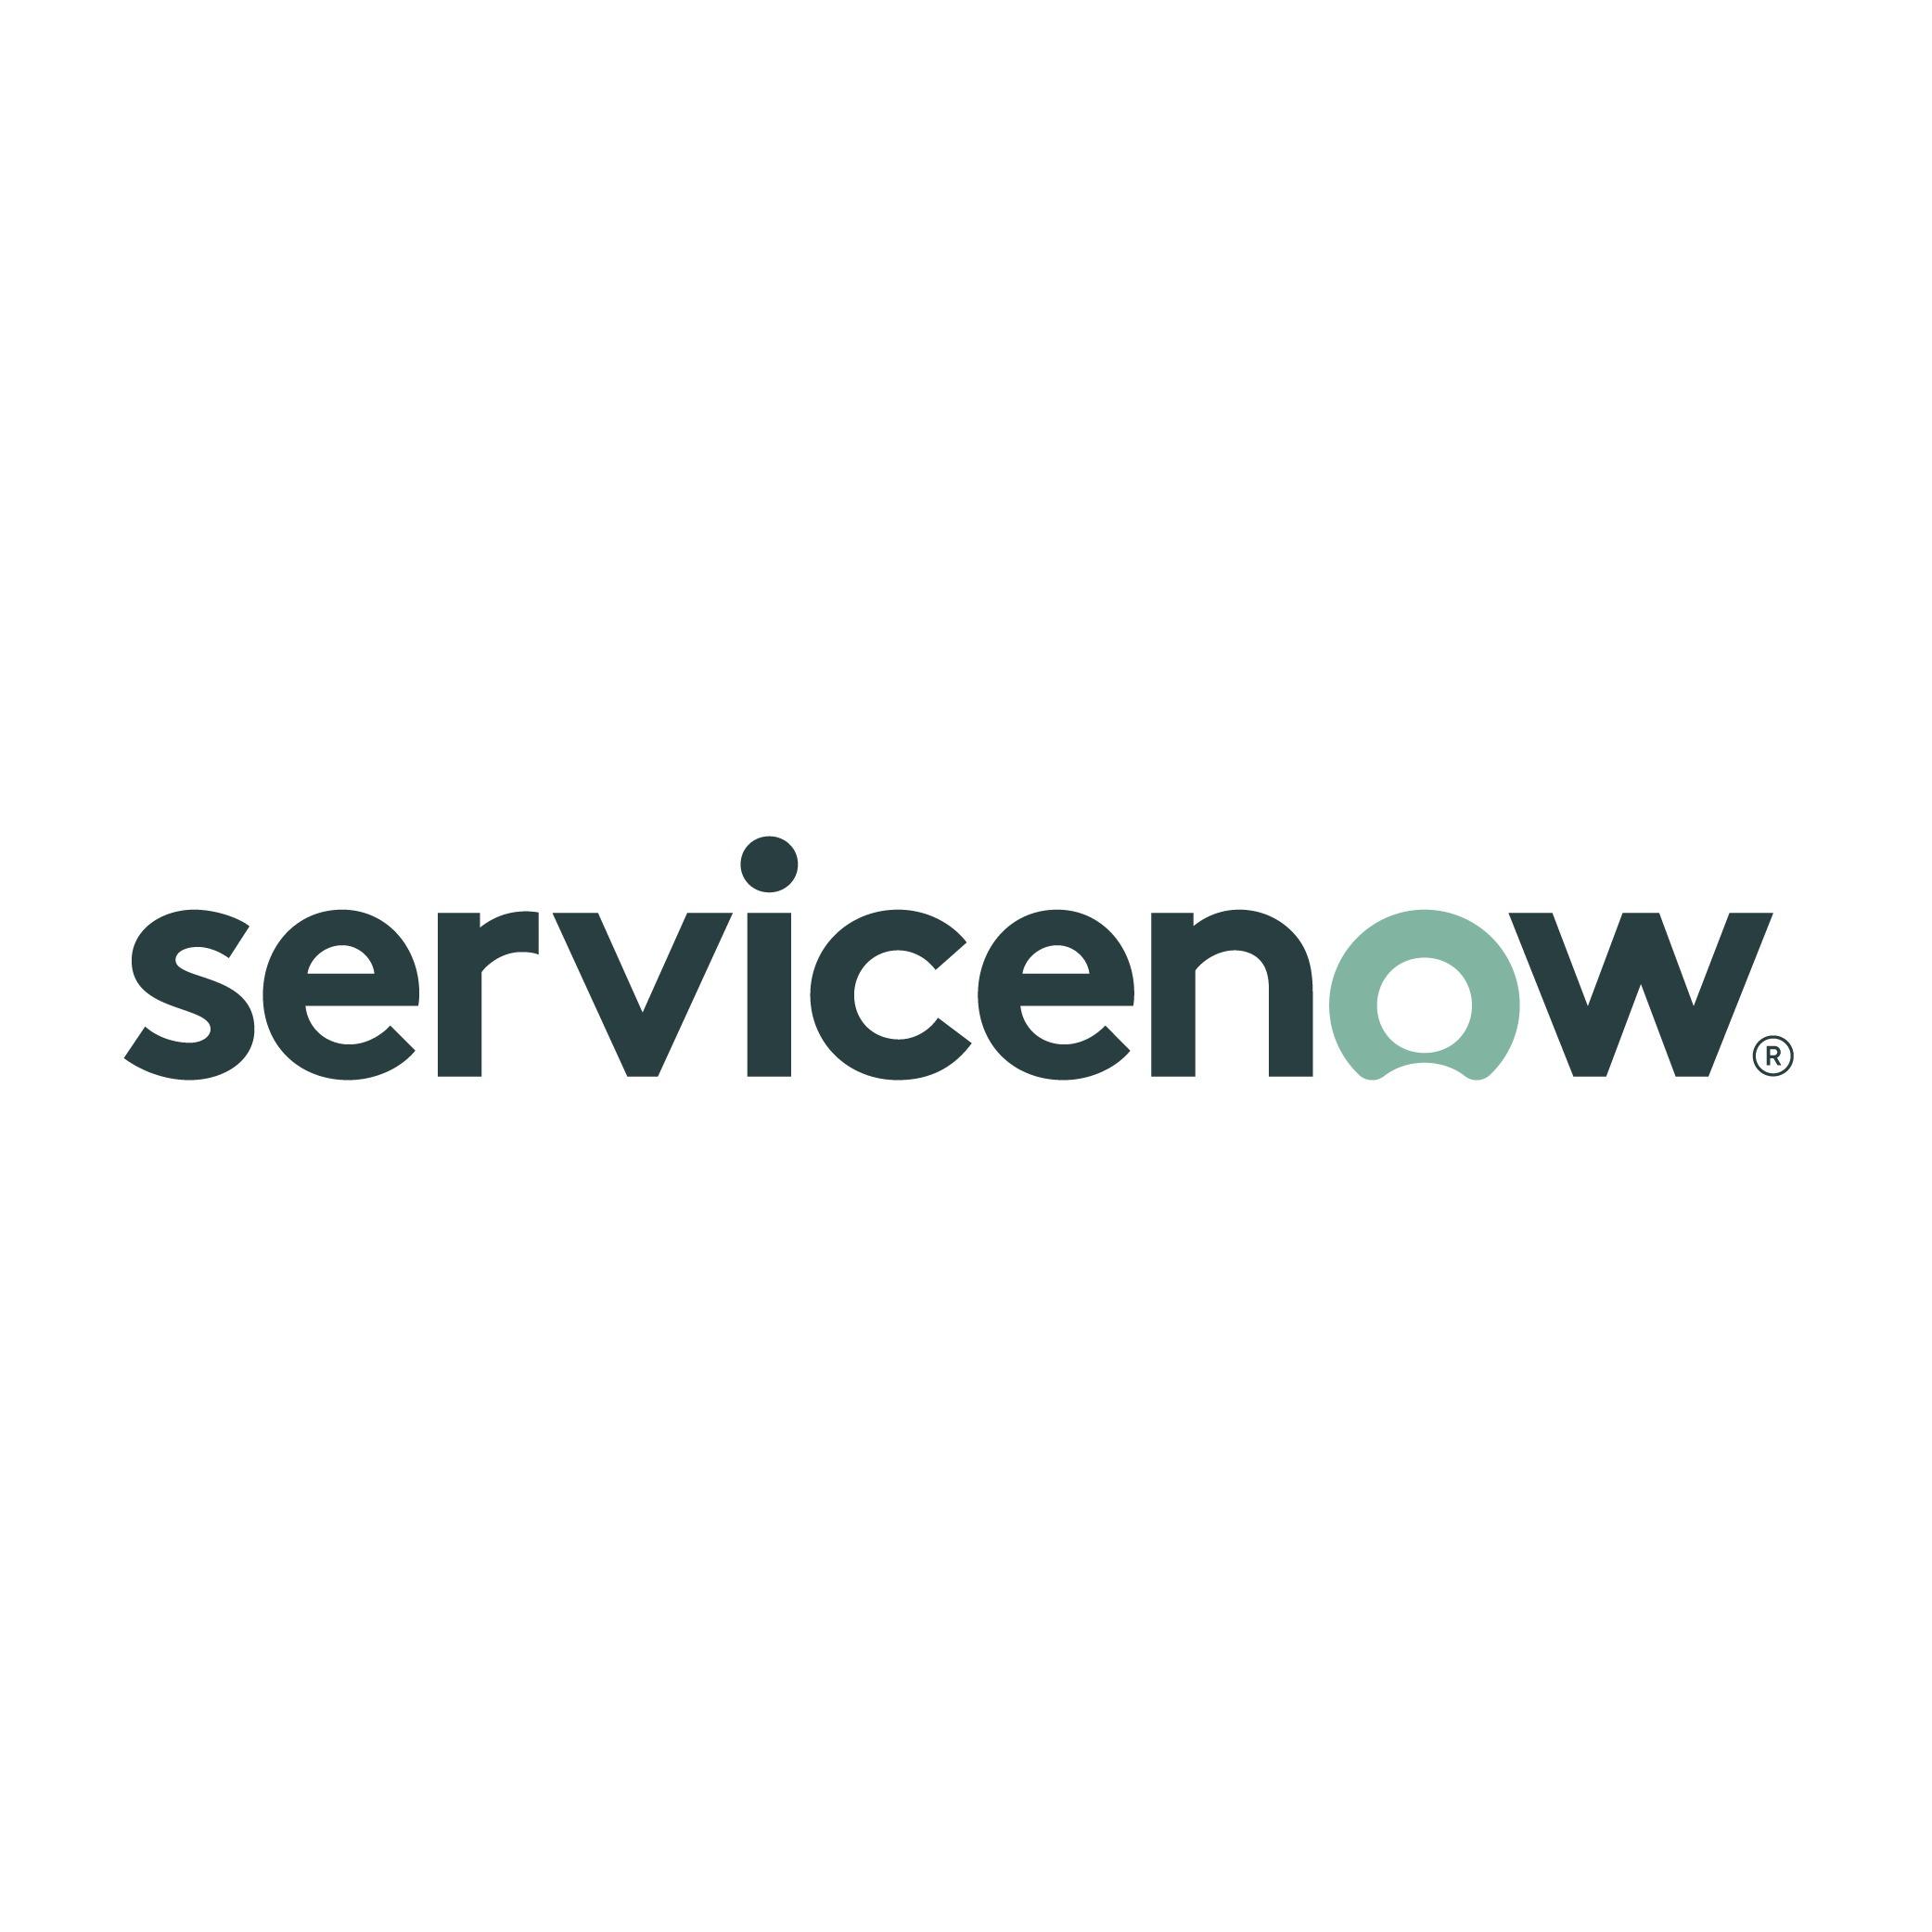 Yext Search for ServiceNow